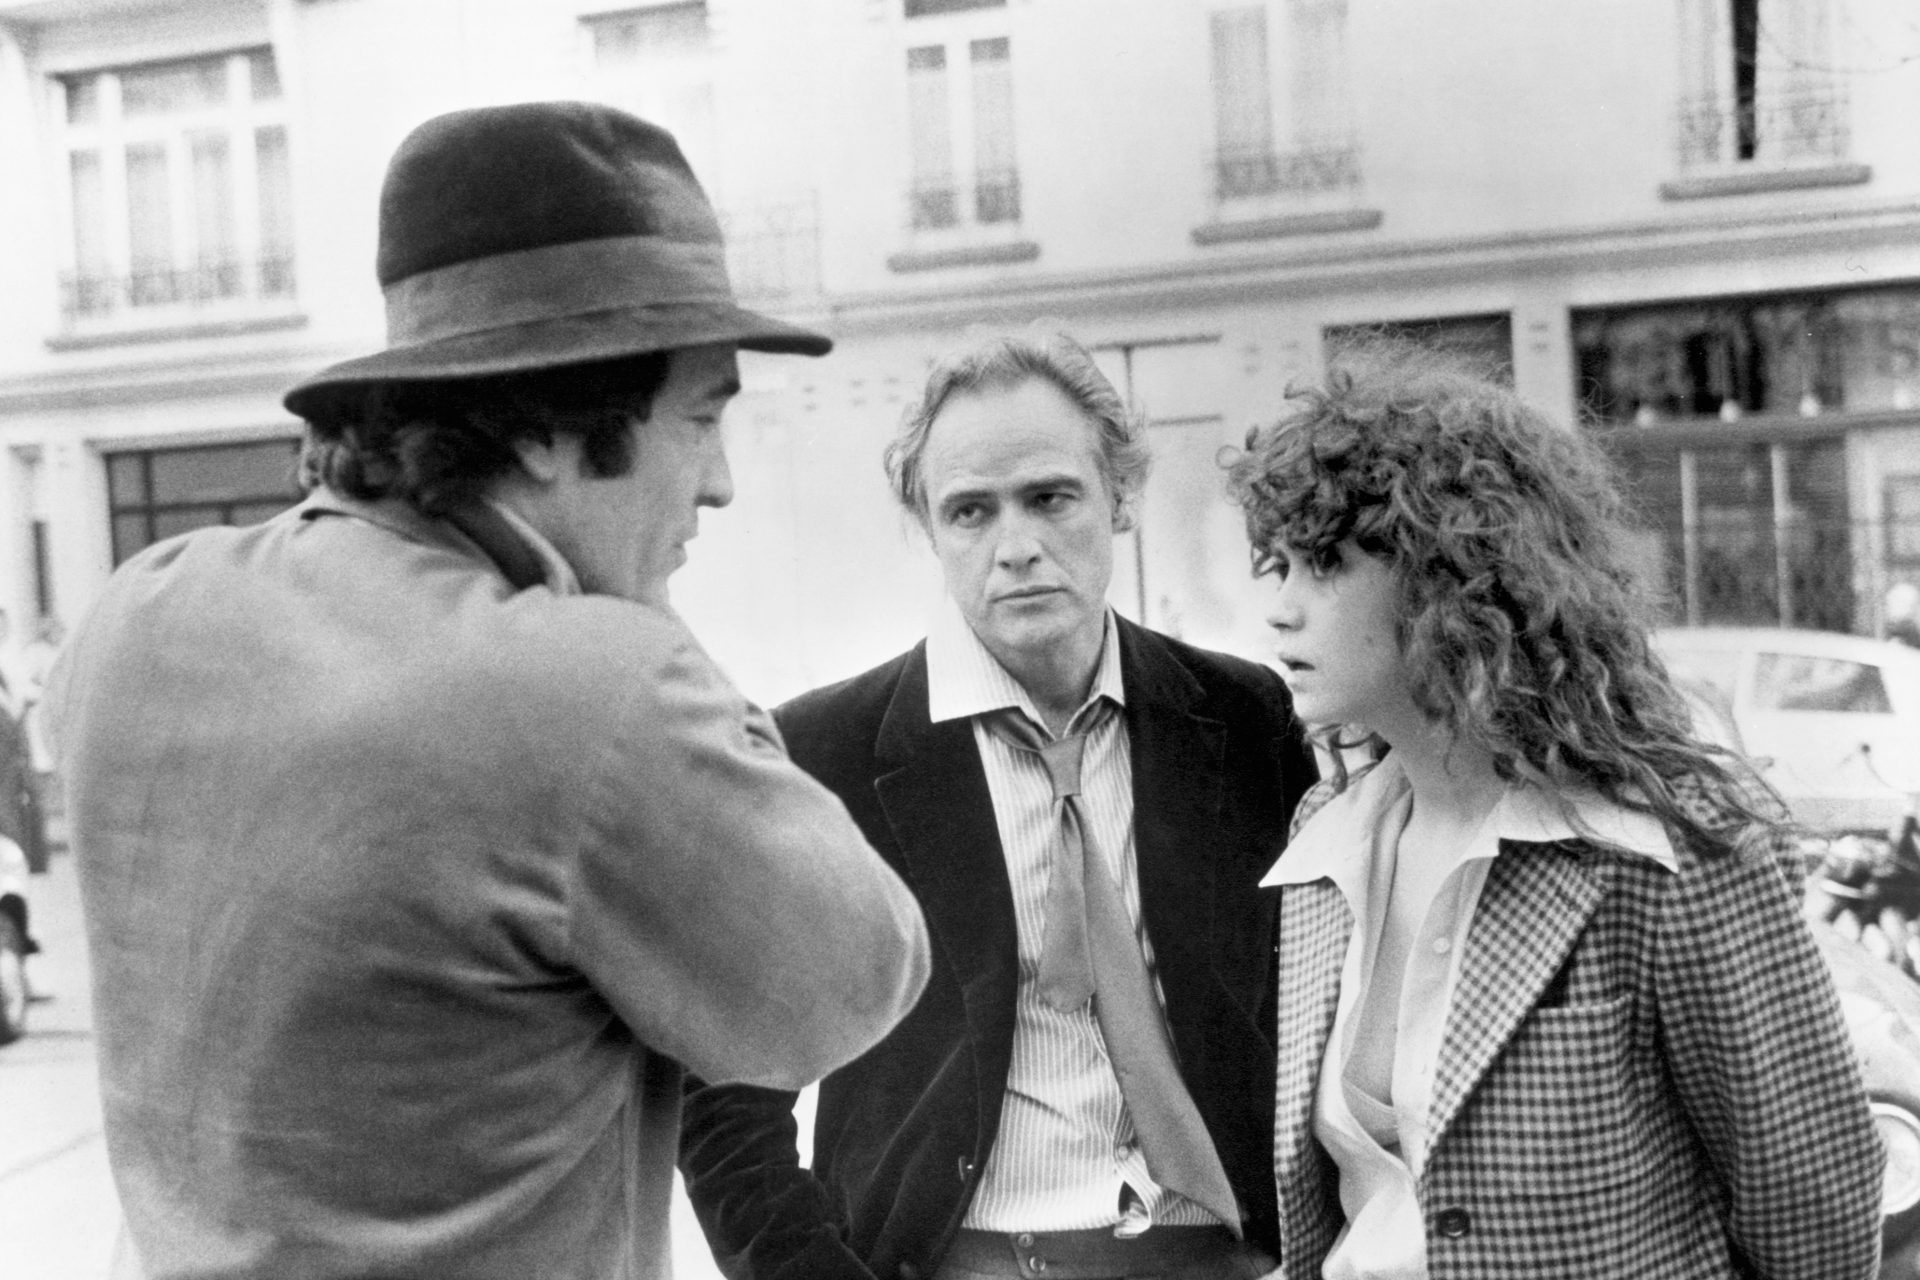 Loved and loathed: the disturbing story behind 'Last Tango in Paris'